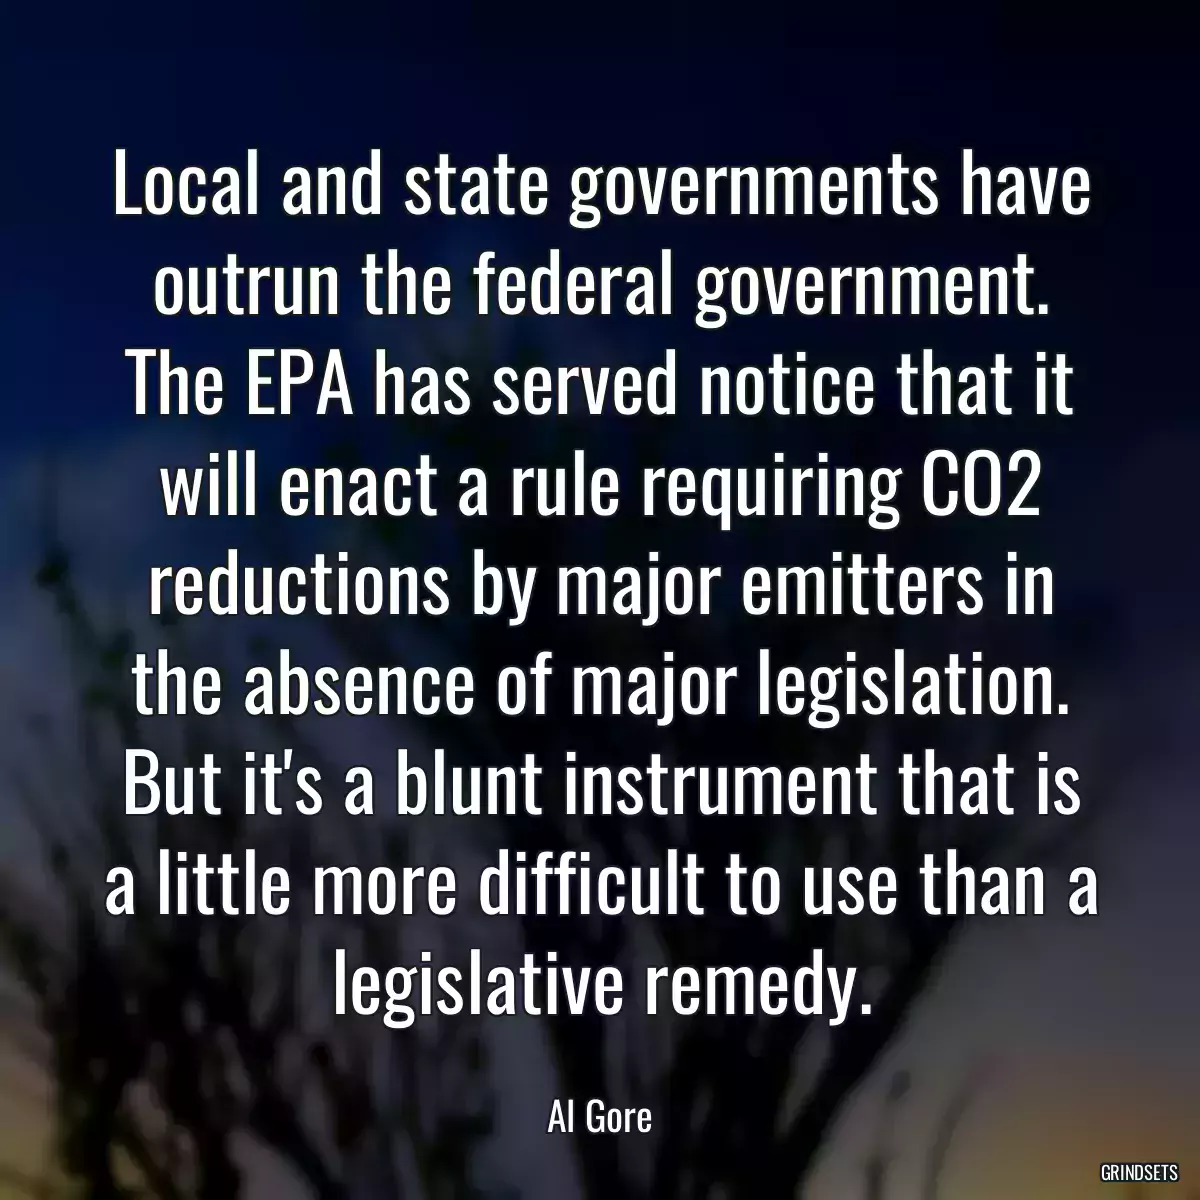 Local and state governments have outrun the federal government. The EPA has served notice that it will enact a rule requiring CO2 reductions by major emitters in the absence of major legislation. But it\'s a blunt instrument that is a little more difficult to use than a legislative remedy.